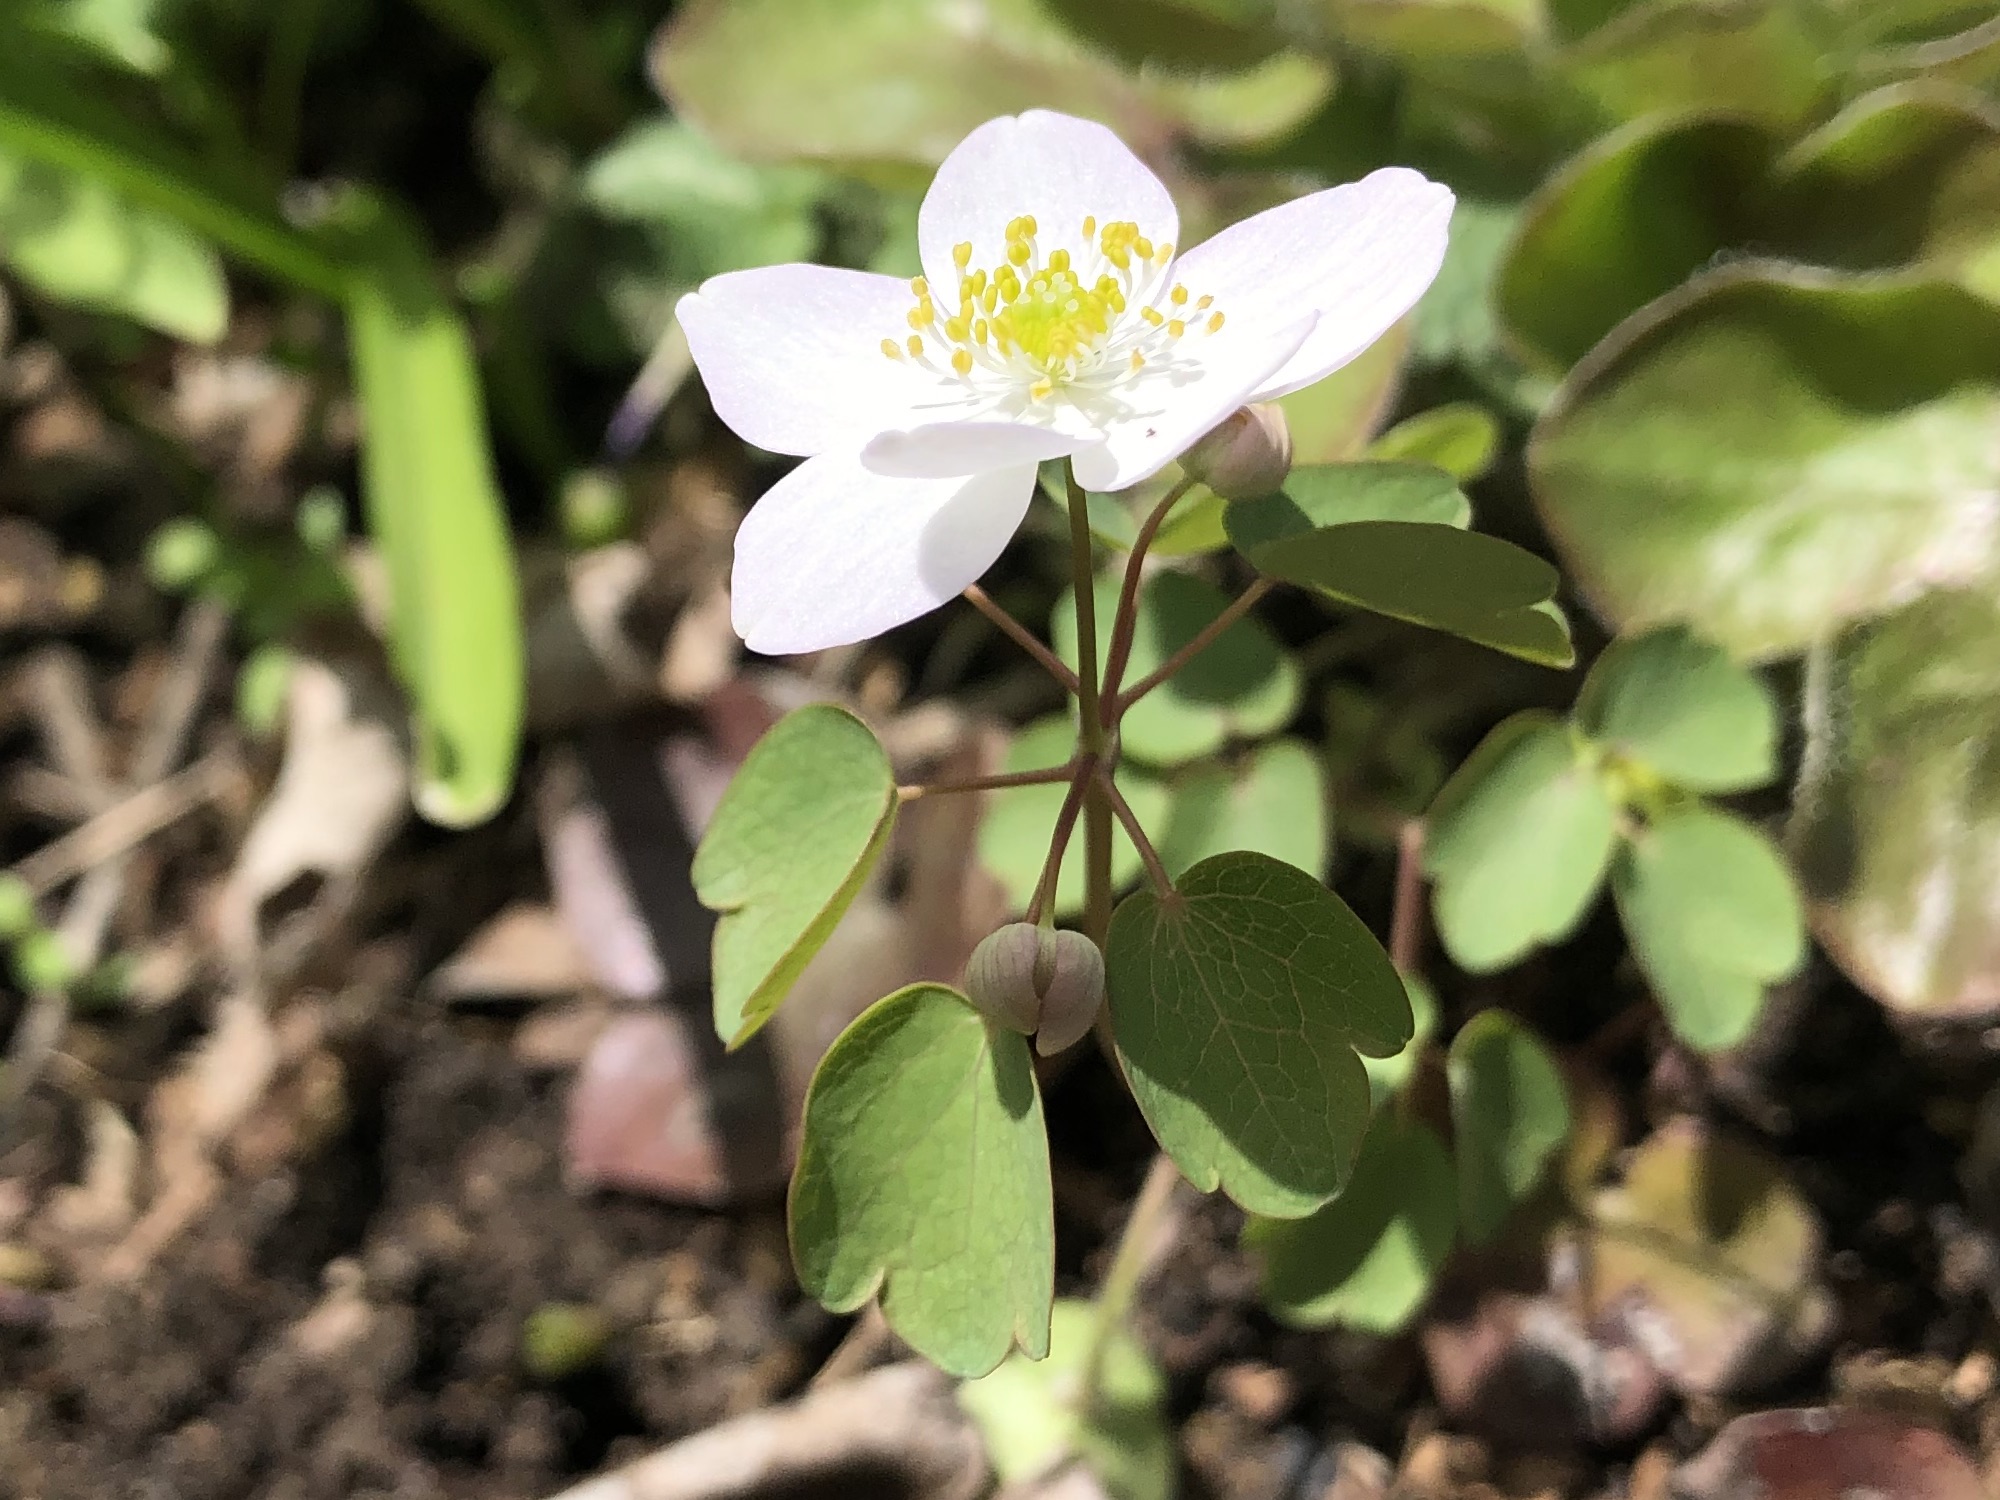 Rue-anemone near Agawa Path (growing through Hepatica leaves) in Madison, Wisconsin on May 4, 2022.